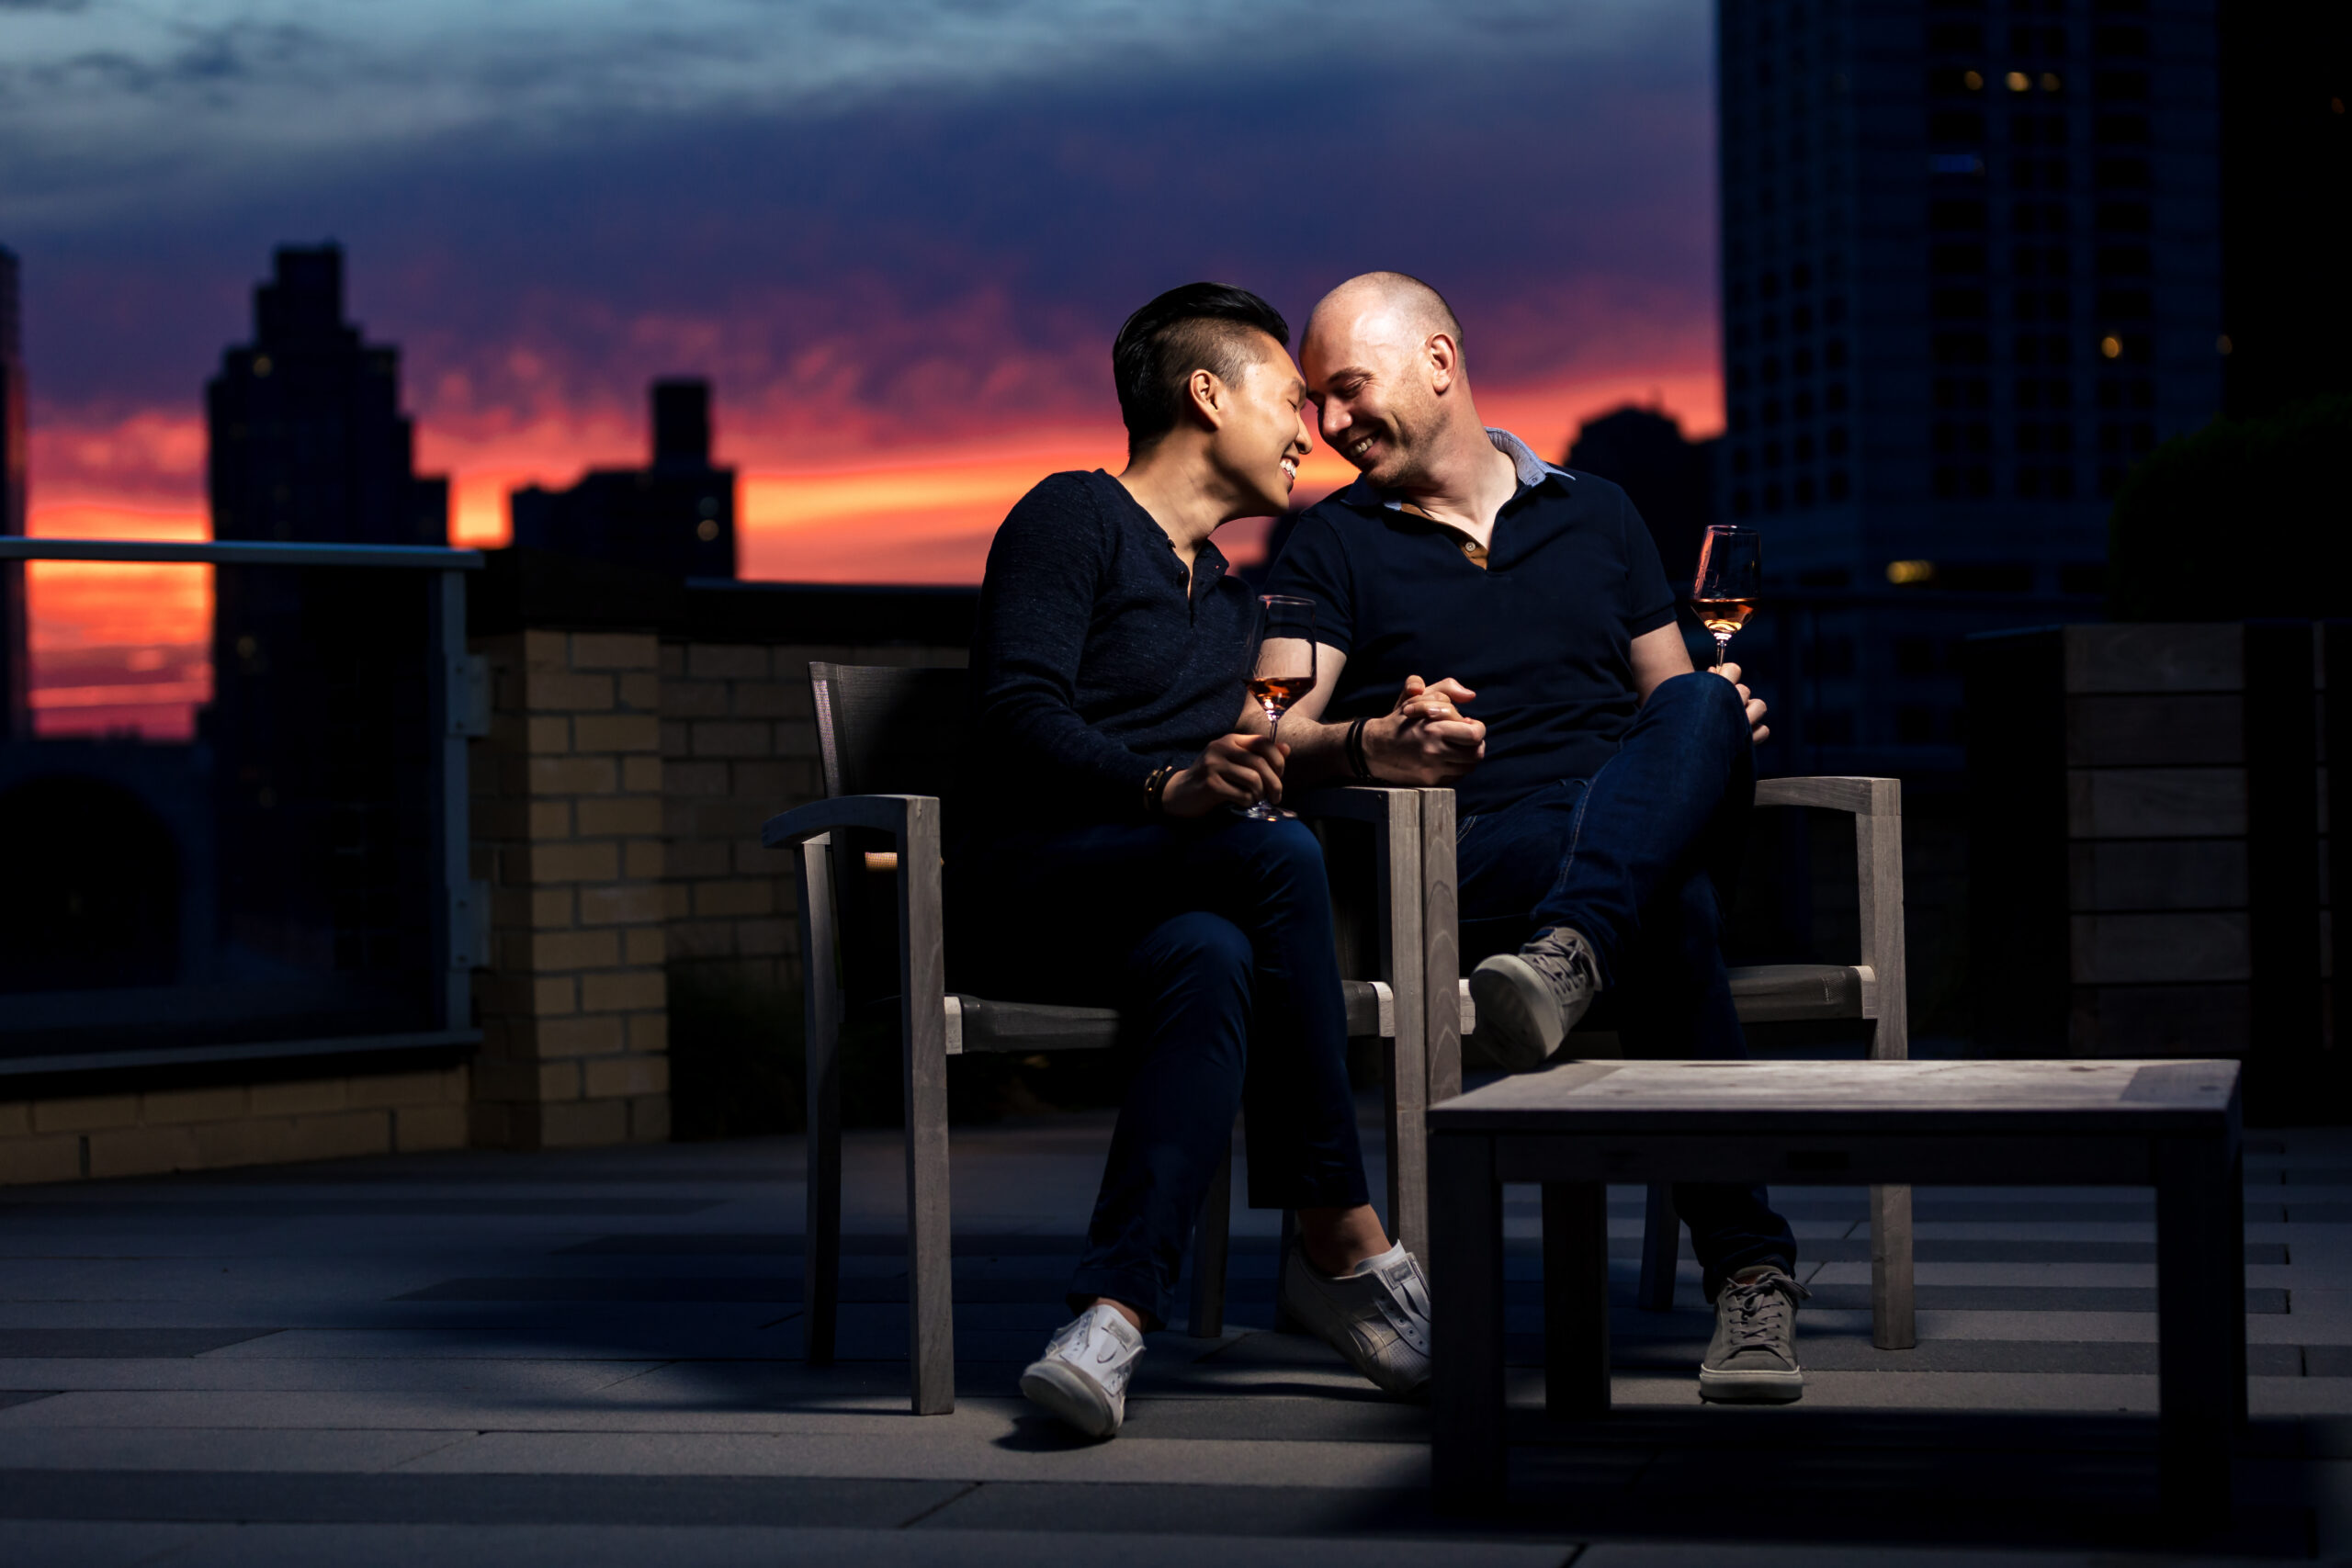 Engagement session portrait of a joyful LGBTQ+ couple on a New York City rooftop, with a breathtaking sunset over the city skyline in the background., captured by North Jersey wedding photographer Jarot Bocanegra